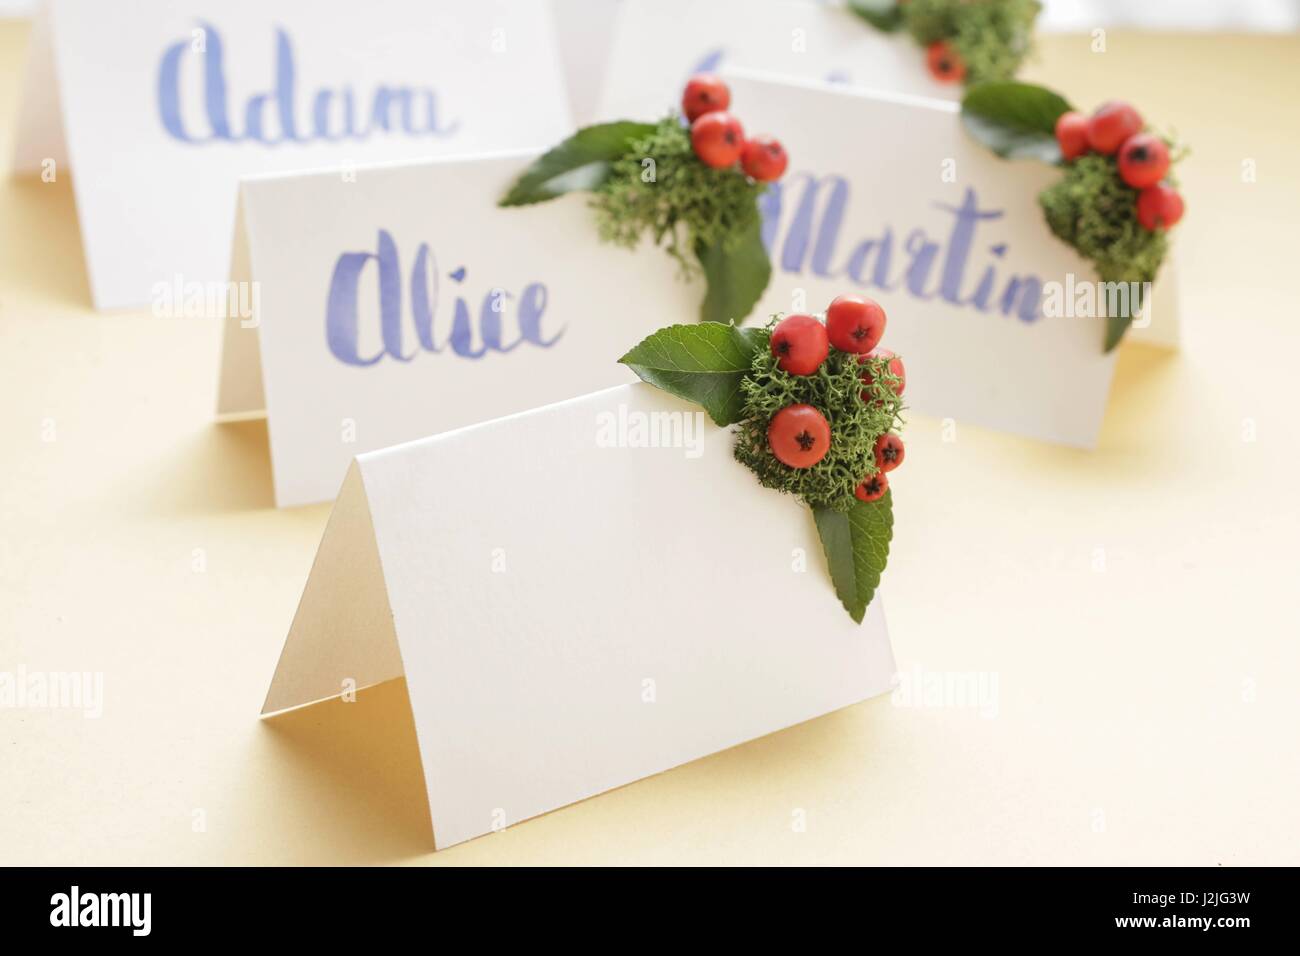 Wedding Place Name Cards Handwritten High Resolution Stock